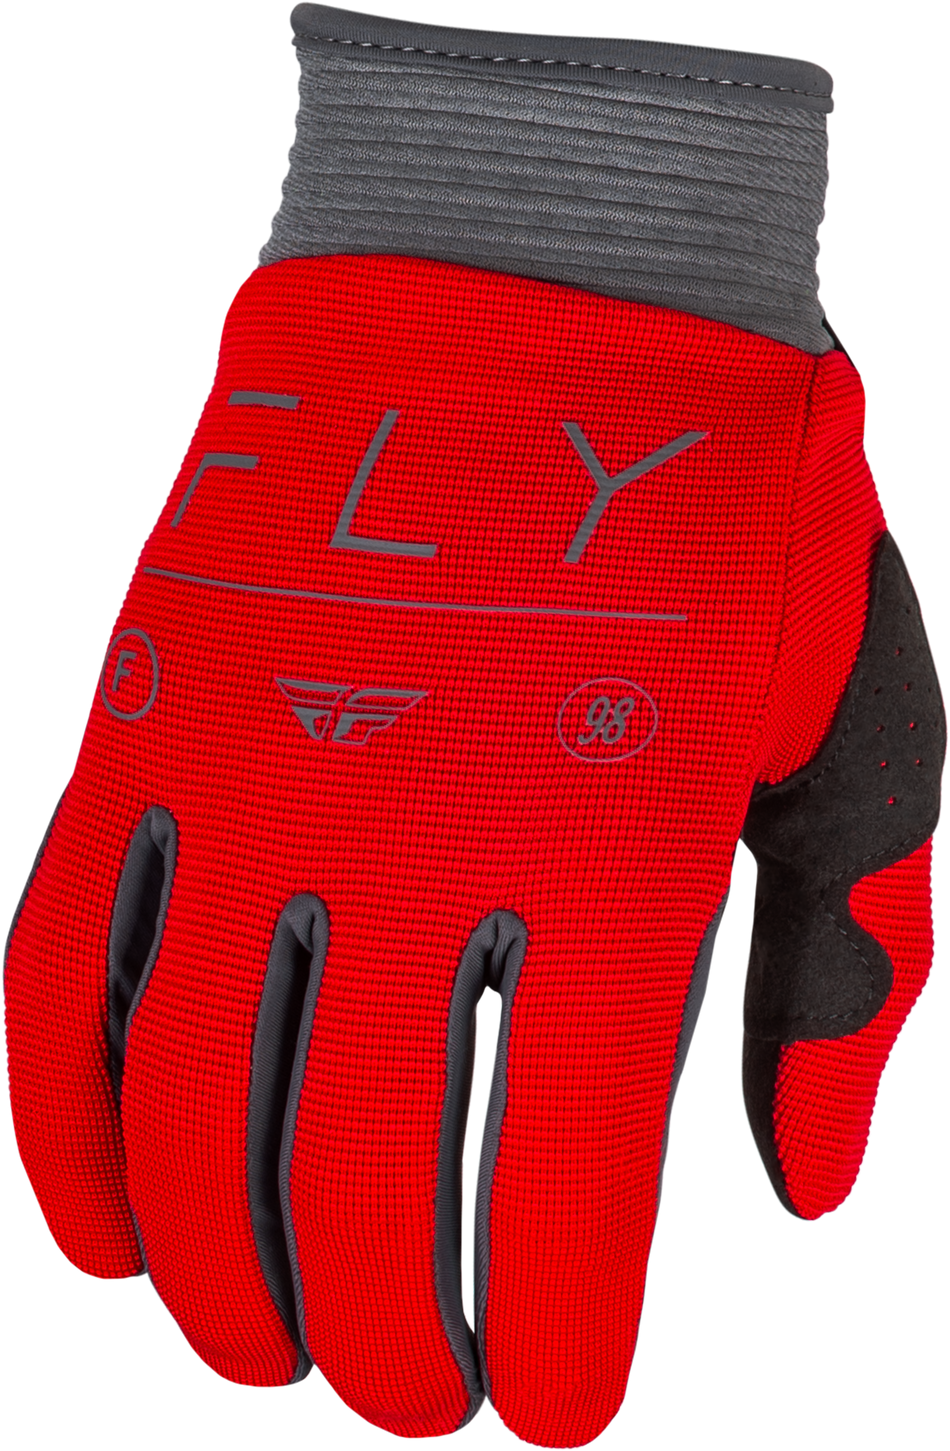 FLY RACING Youth F-16 Gloves Red/Charcoal/White Ys 377-913YS